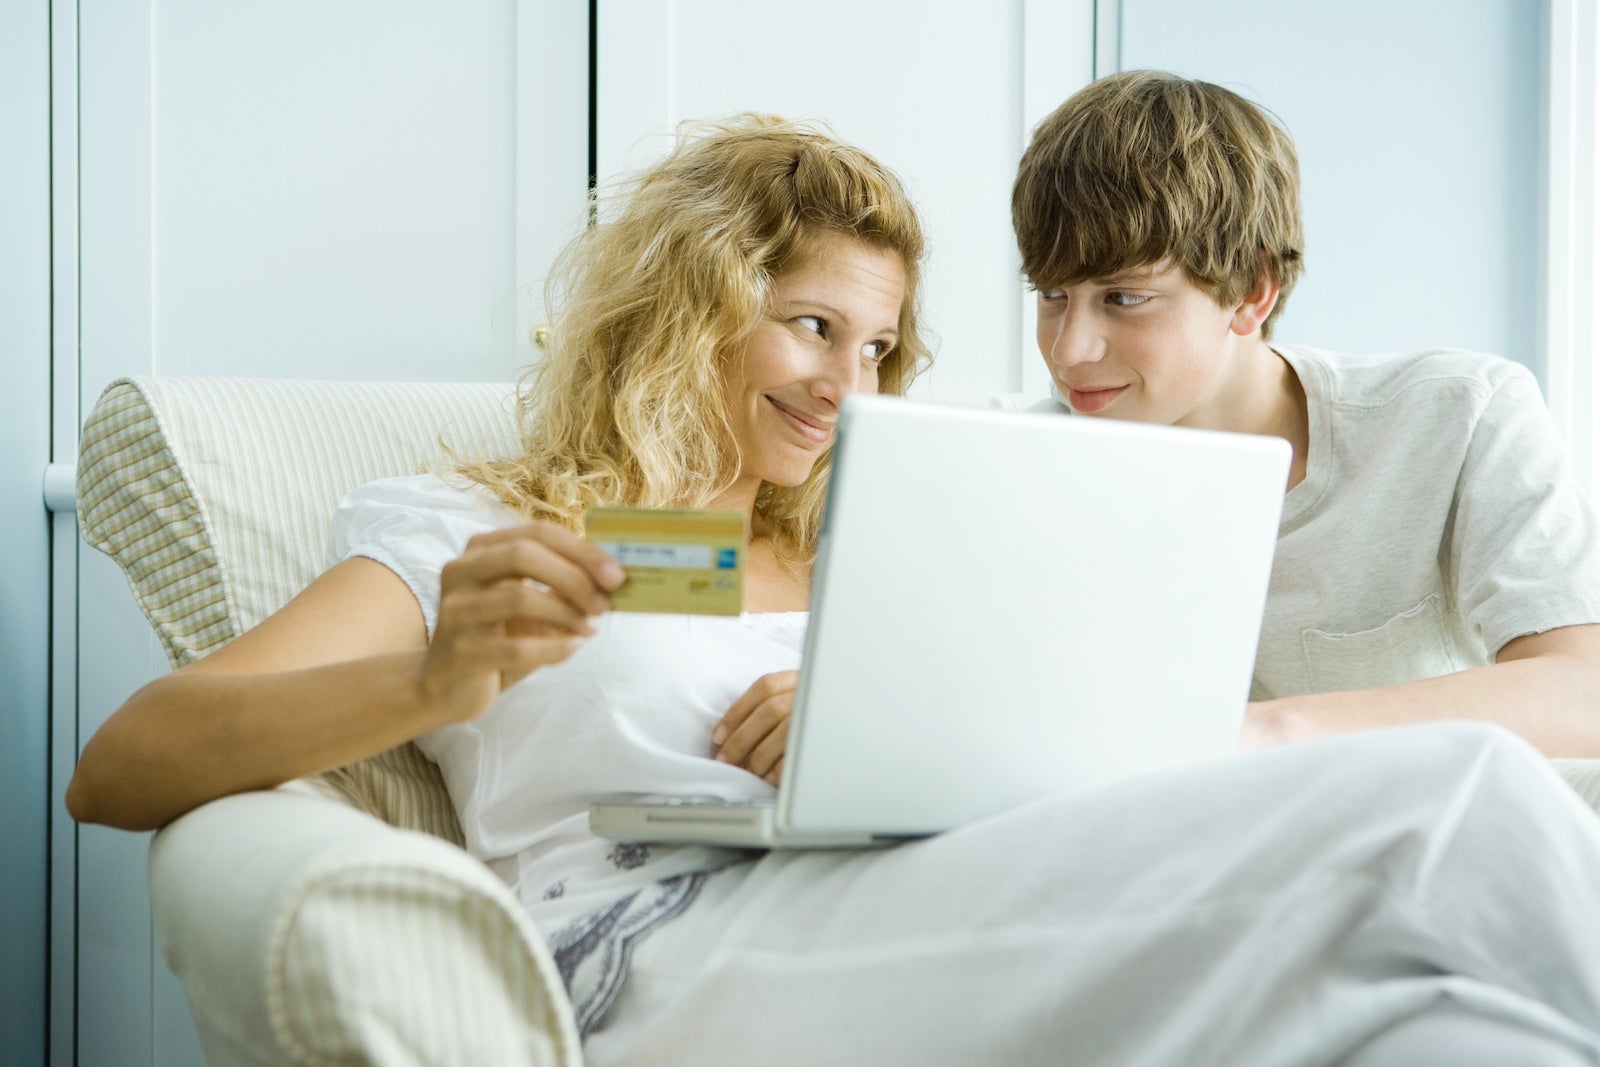 A mother and son look at a computer while holding a credit card